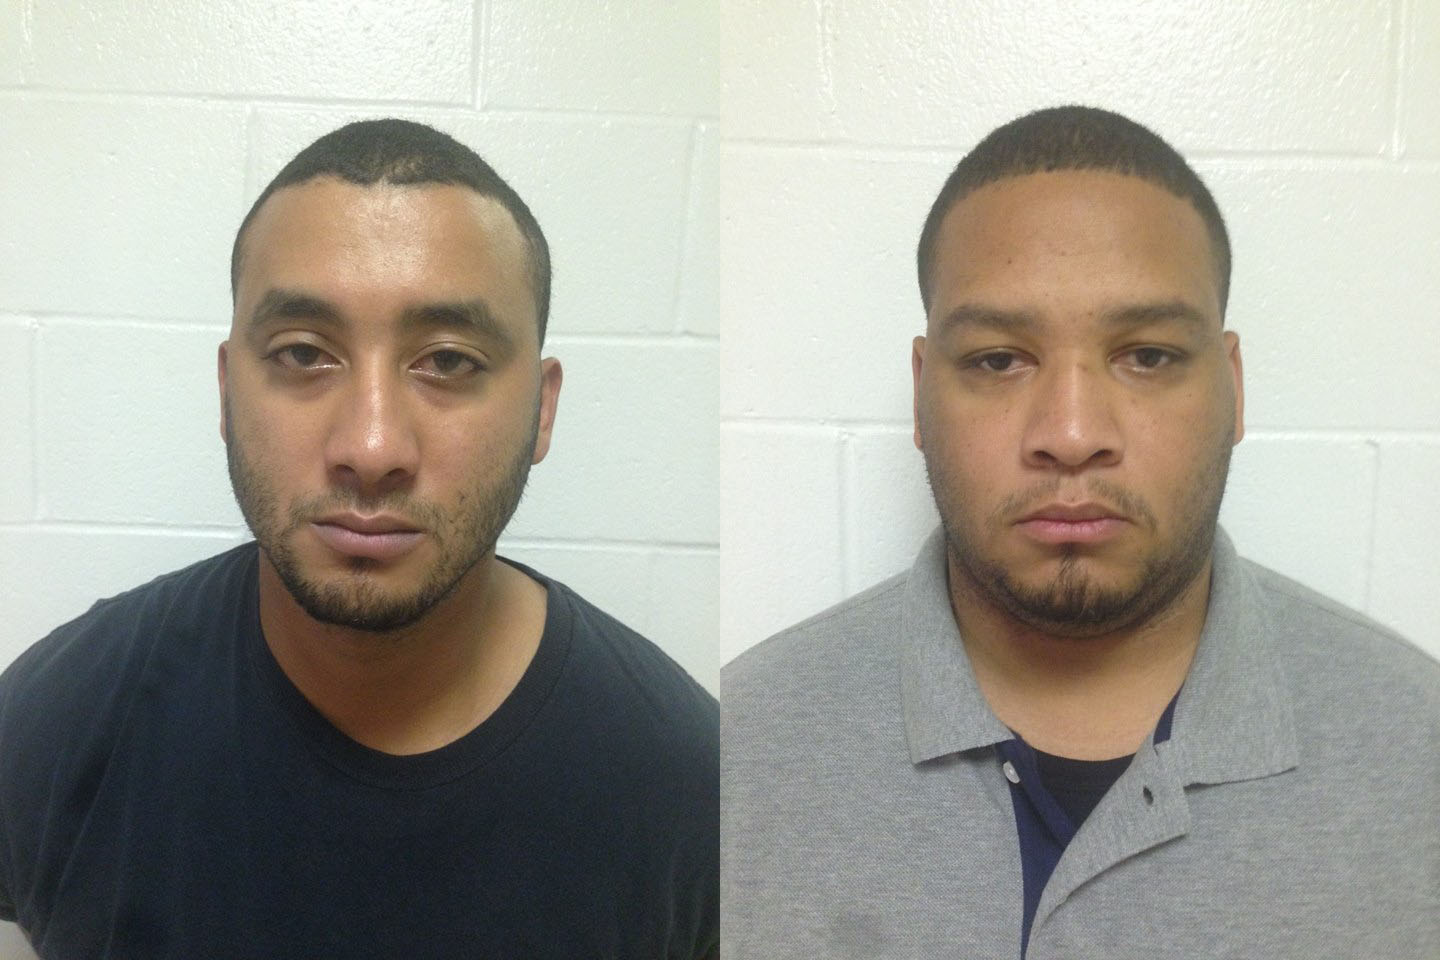 PHOTO:Louisiana State Police have released mug shots for Norris J. Greenhouse Jr. (left) and Derrick W. Stafford, the police officers arrested on November 6, 2015, in the death of a 6-year-old boy in Louisiana. 